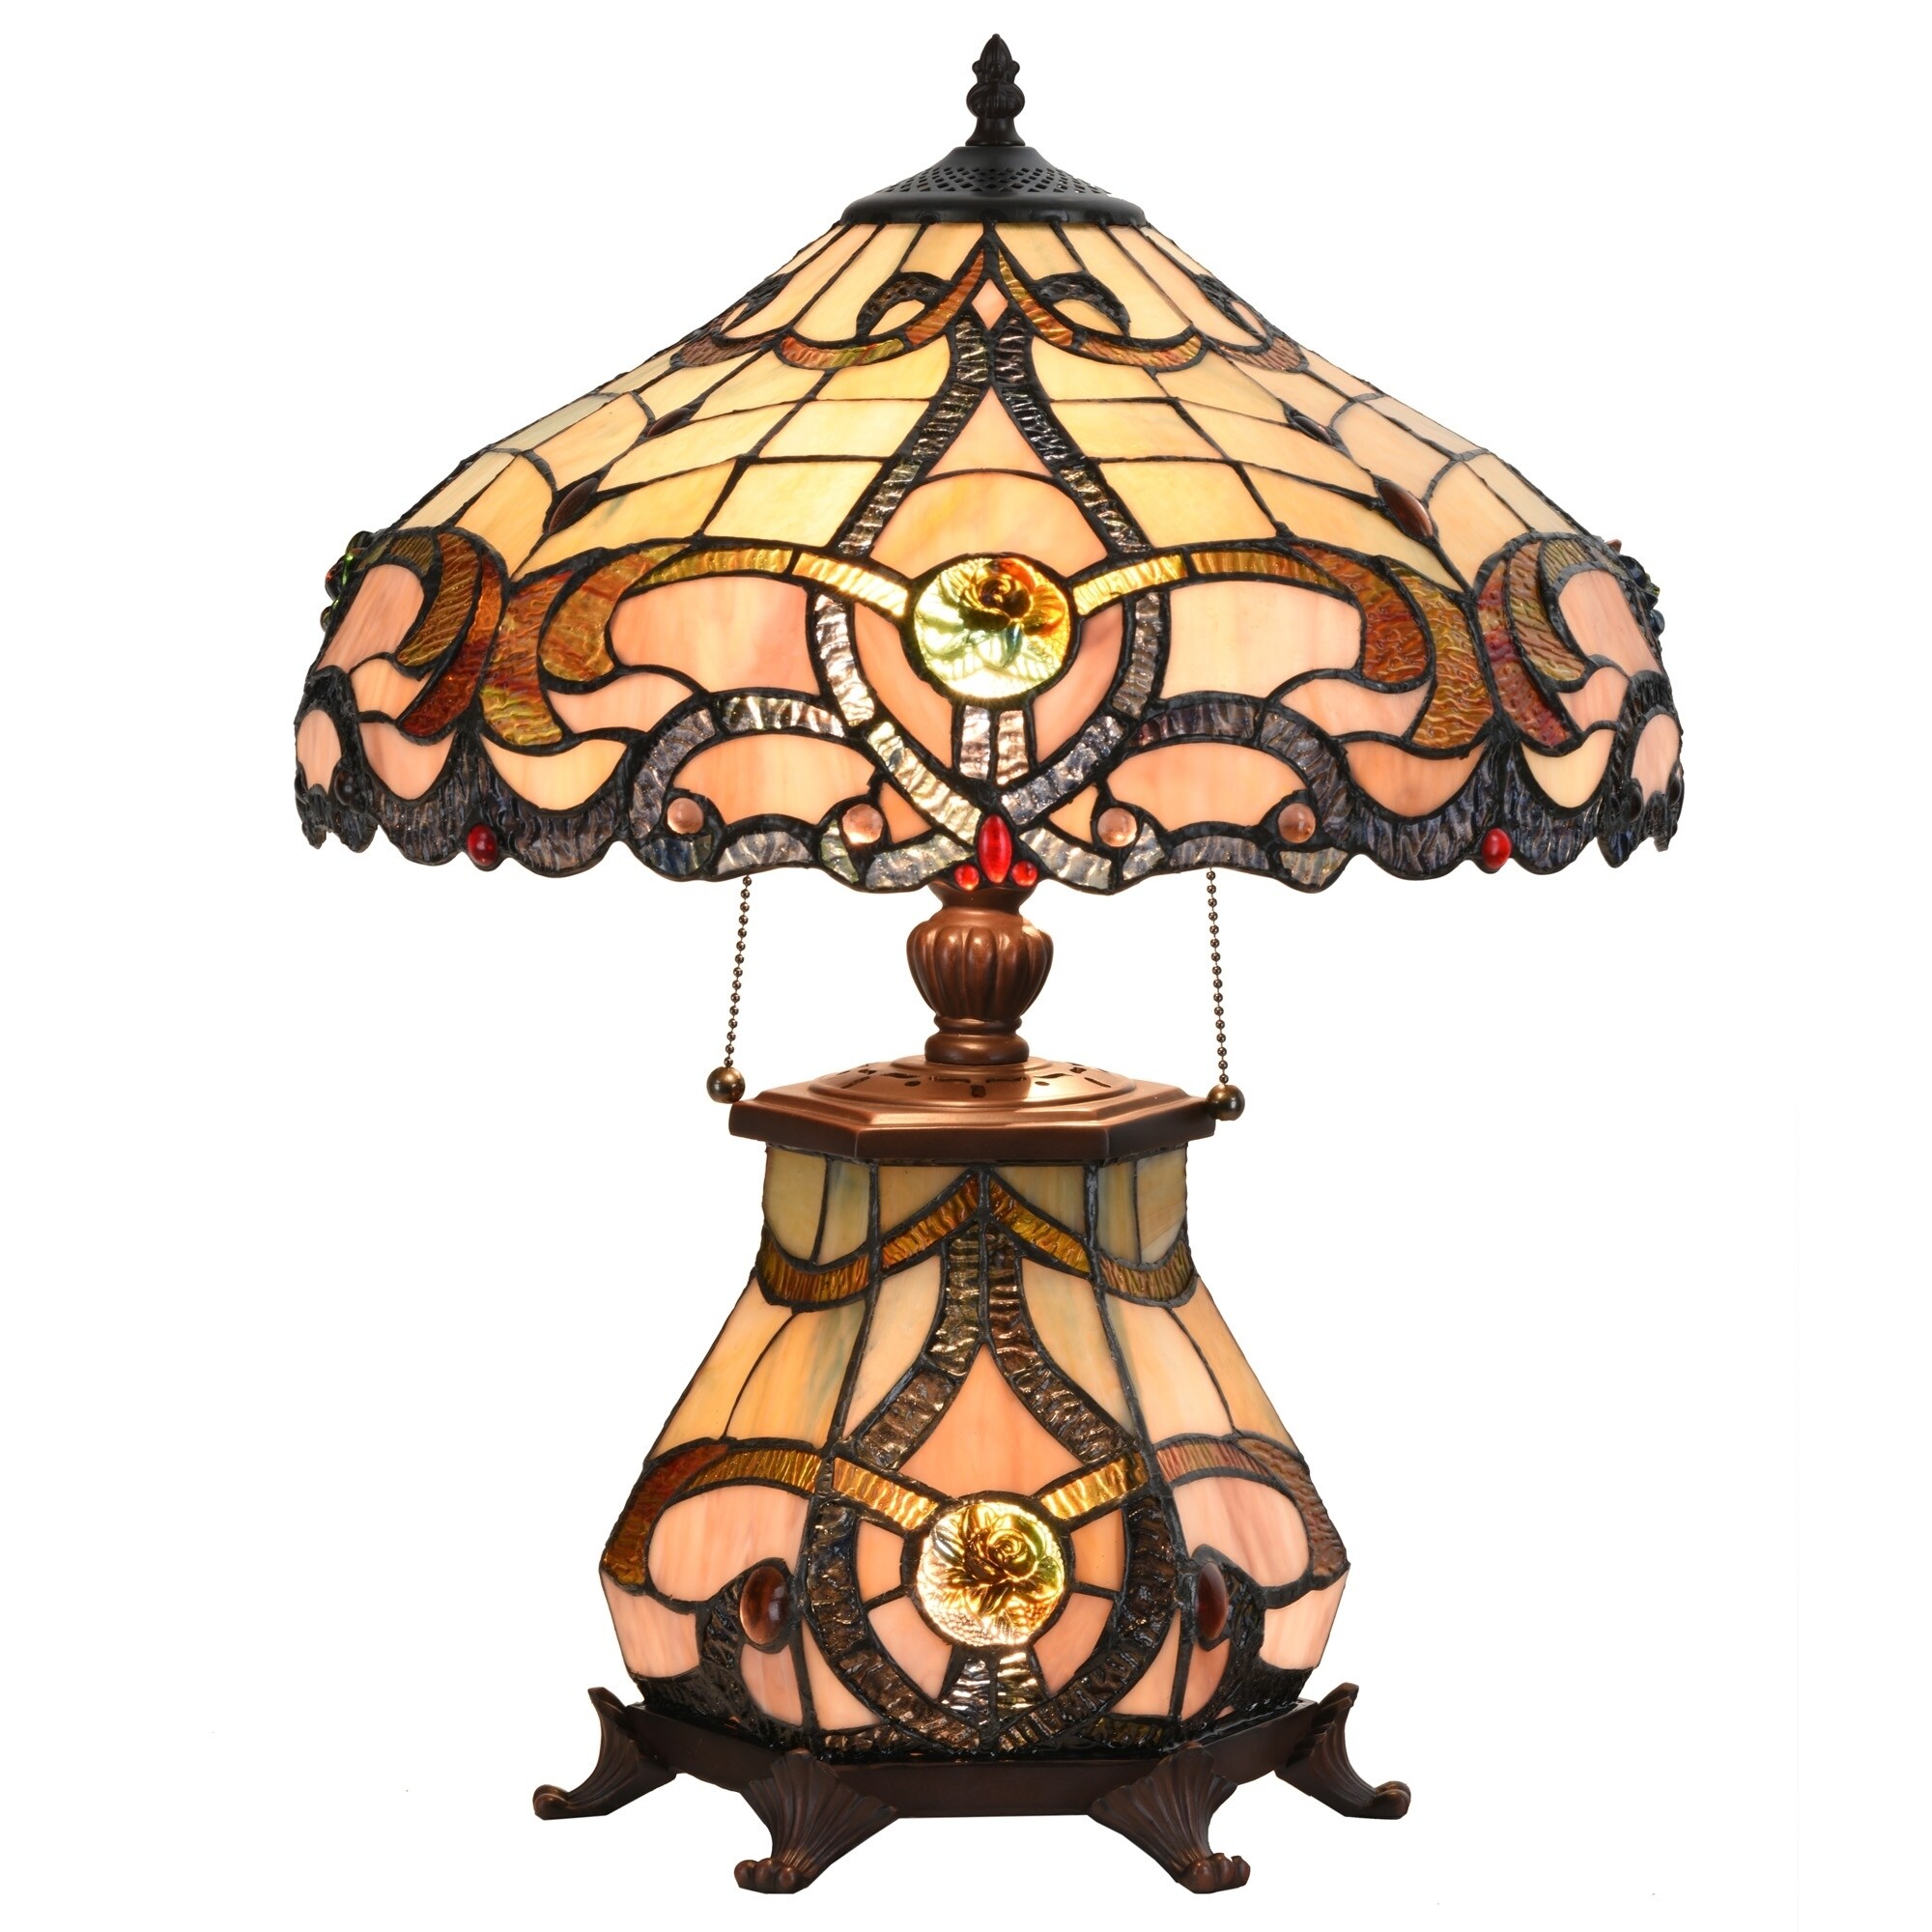 Tiffany Style Lamp Victorian Jeweled Desk Lamp Floral Stained Glass Home  Decor Lighting Table Lamp - Bed Bath & Beyond - 20747534